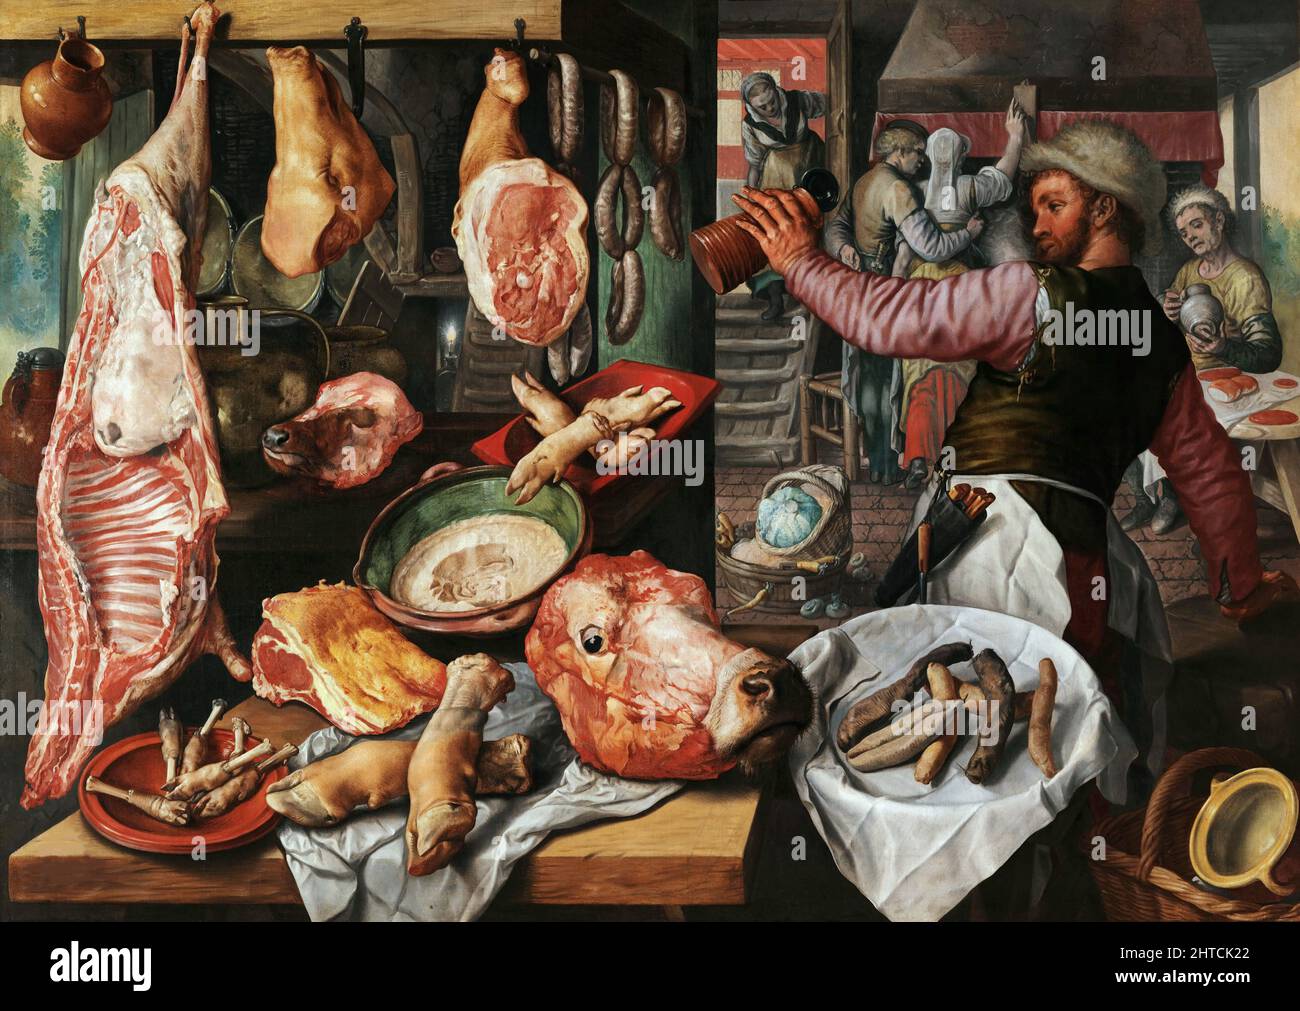 Butcher's Stall, 1568. Found in the Collection of the Museo di Capodimonte, Naples. Stock Photo